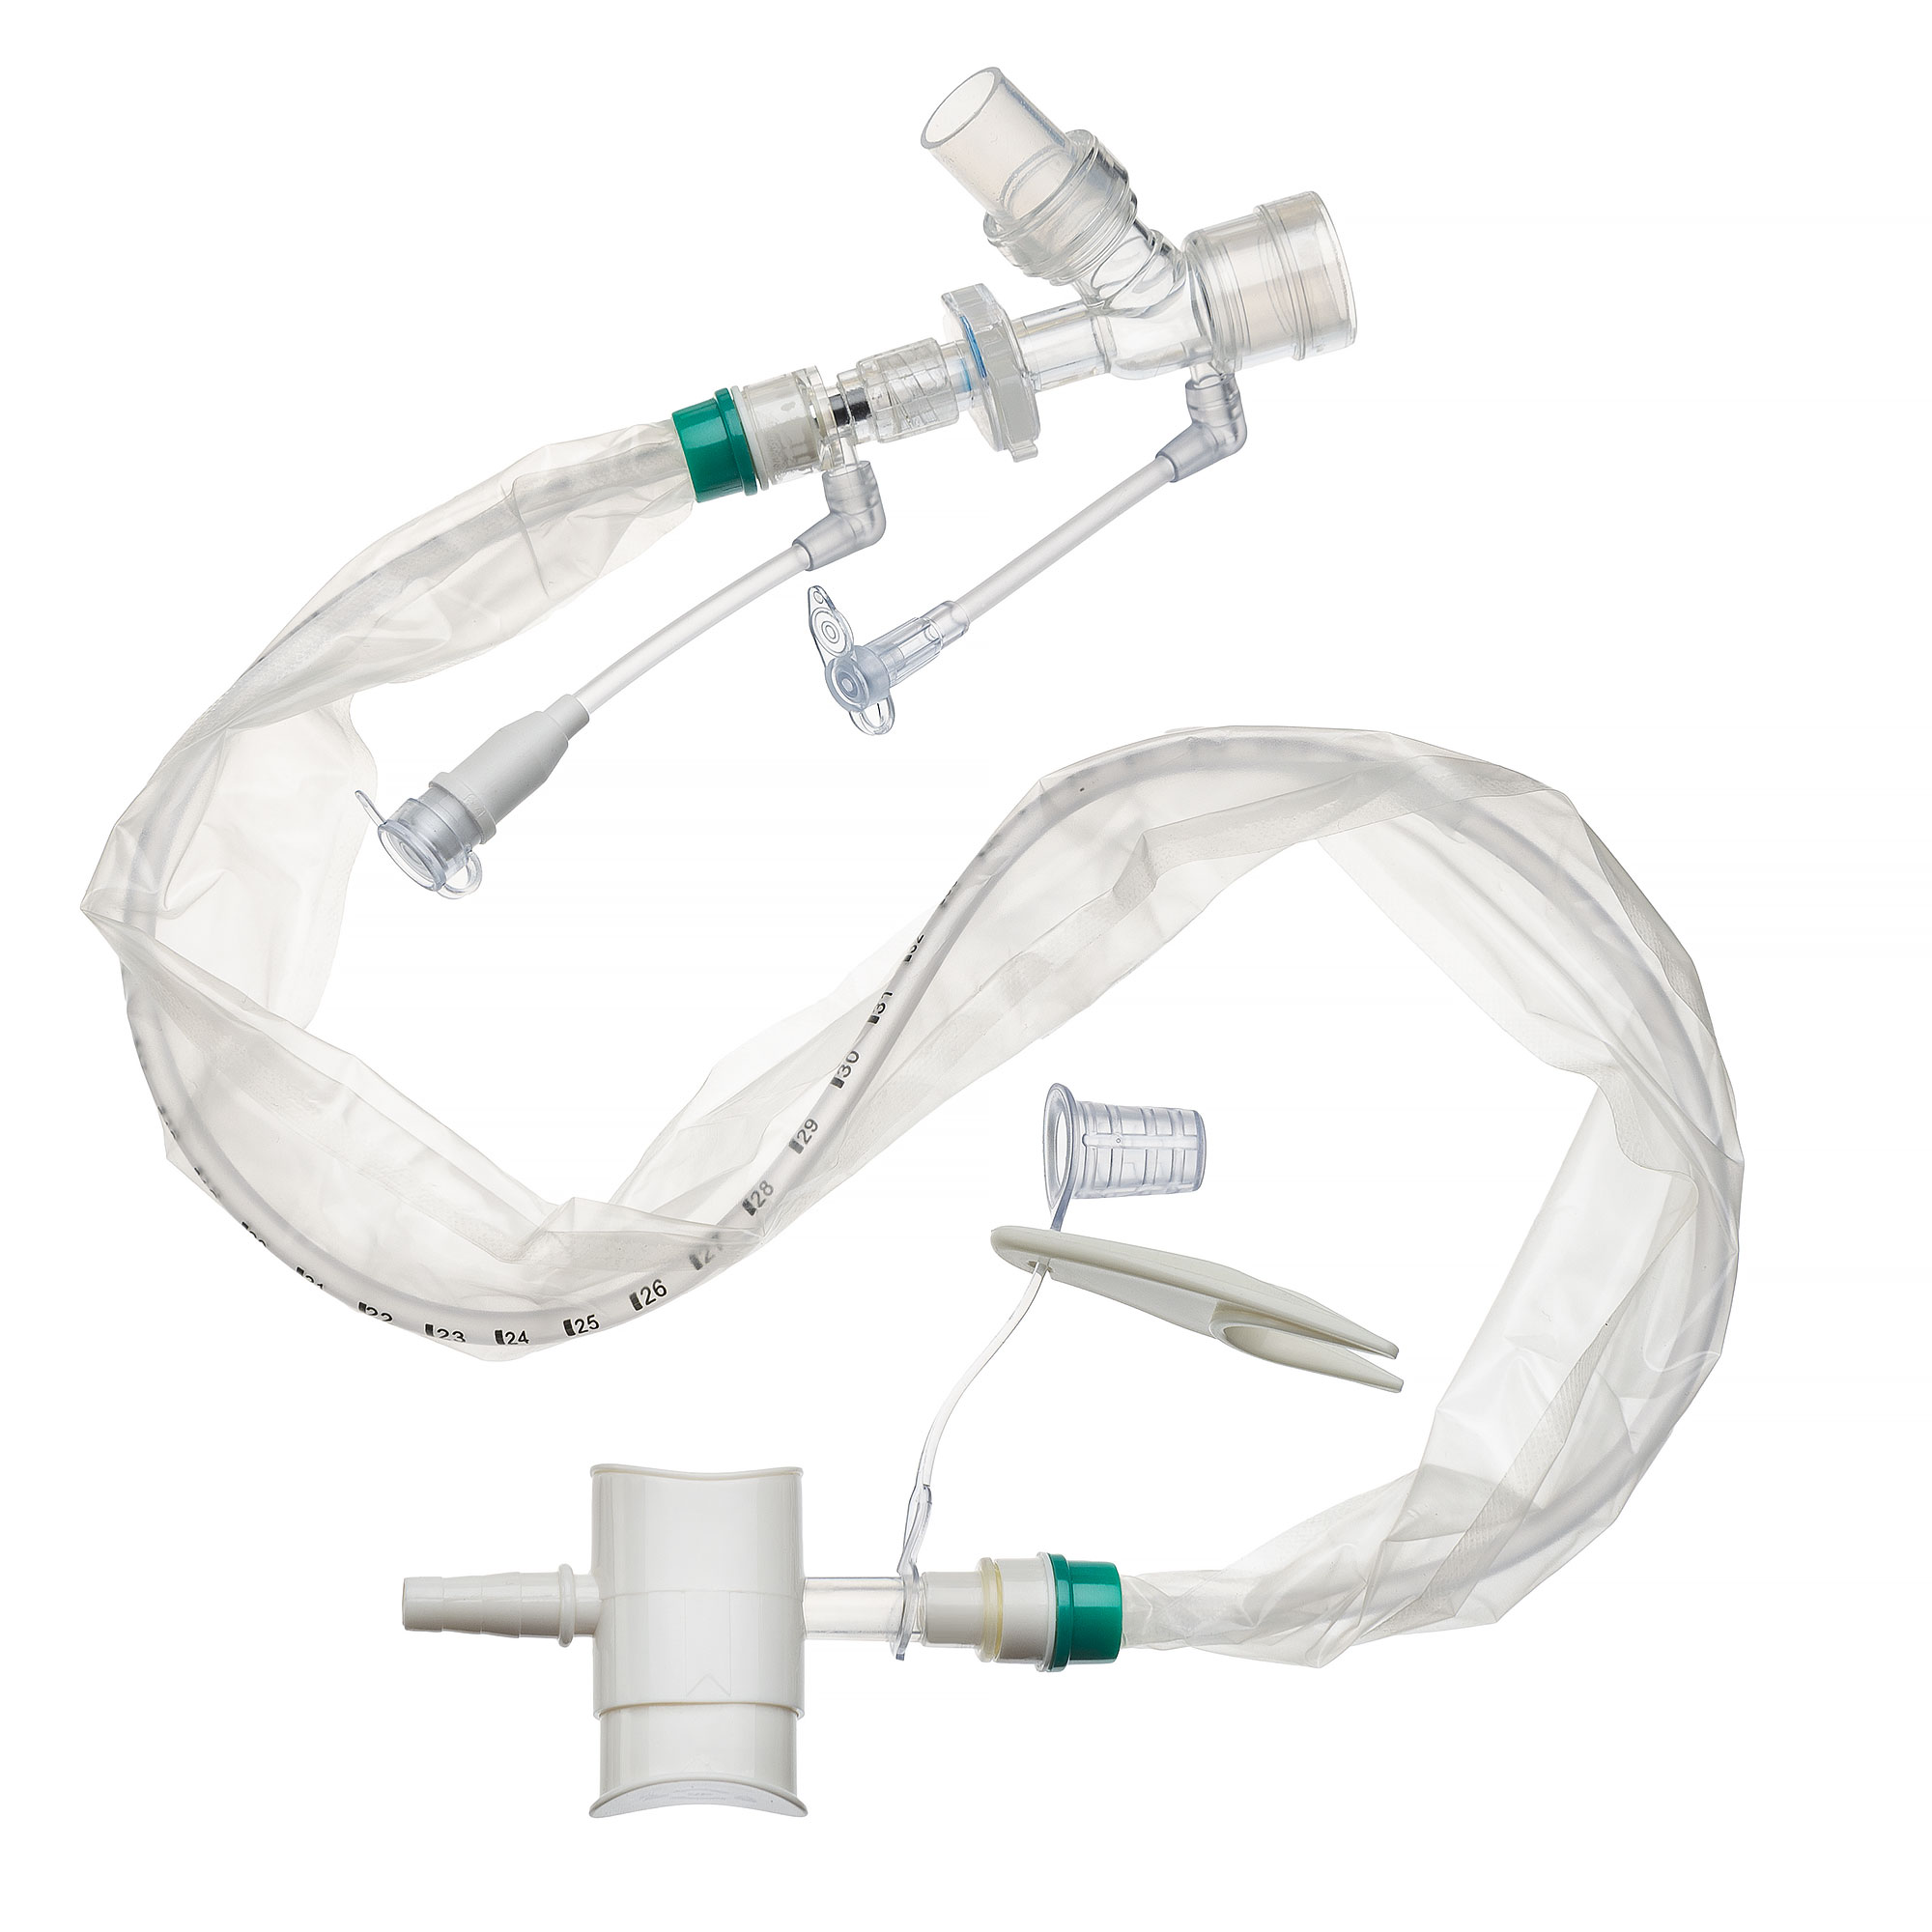 tracheostomy suctioning closed system